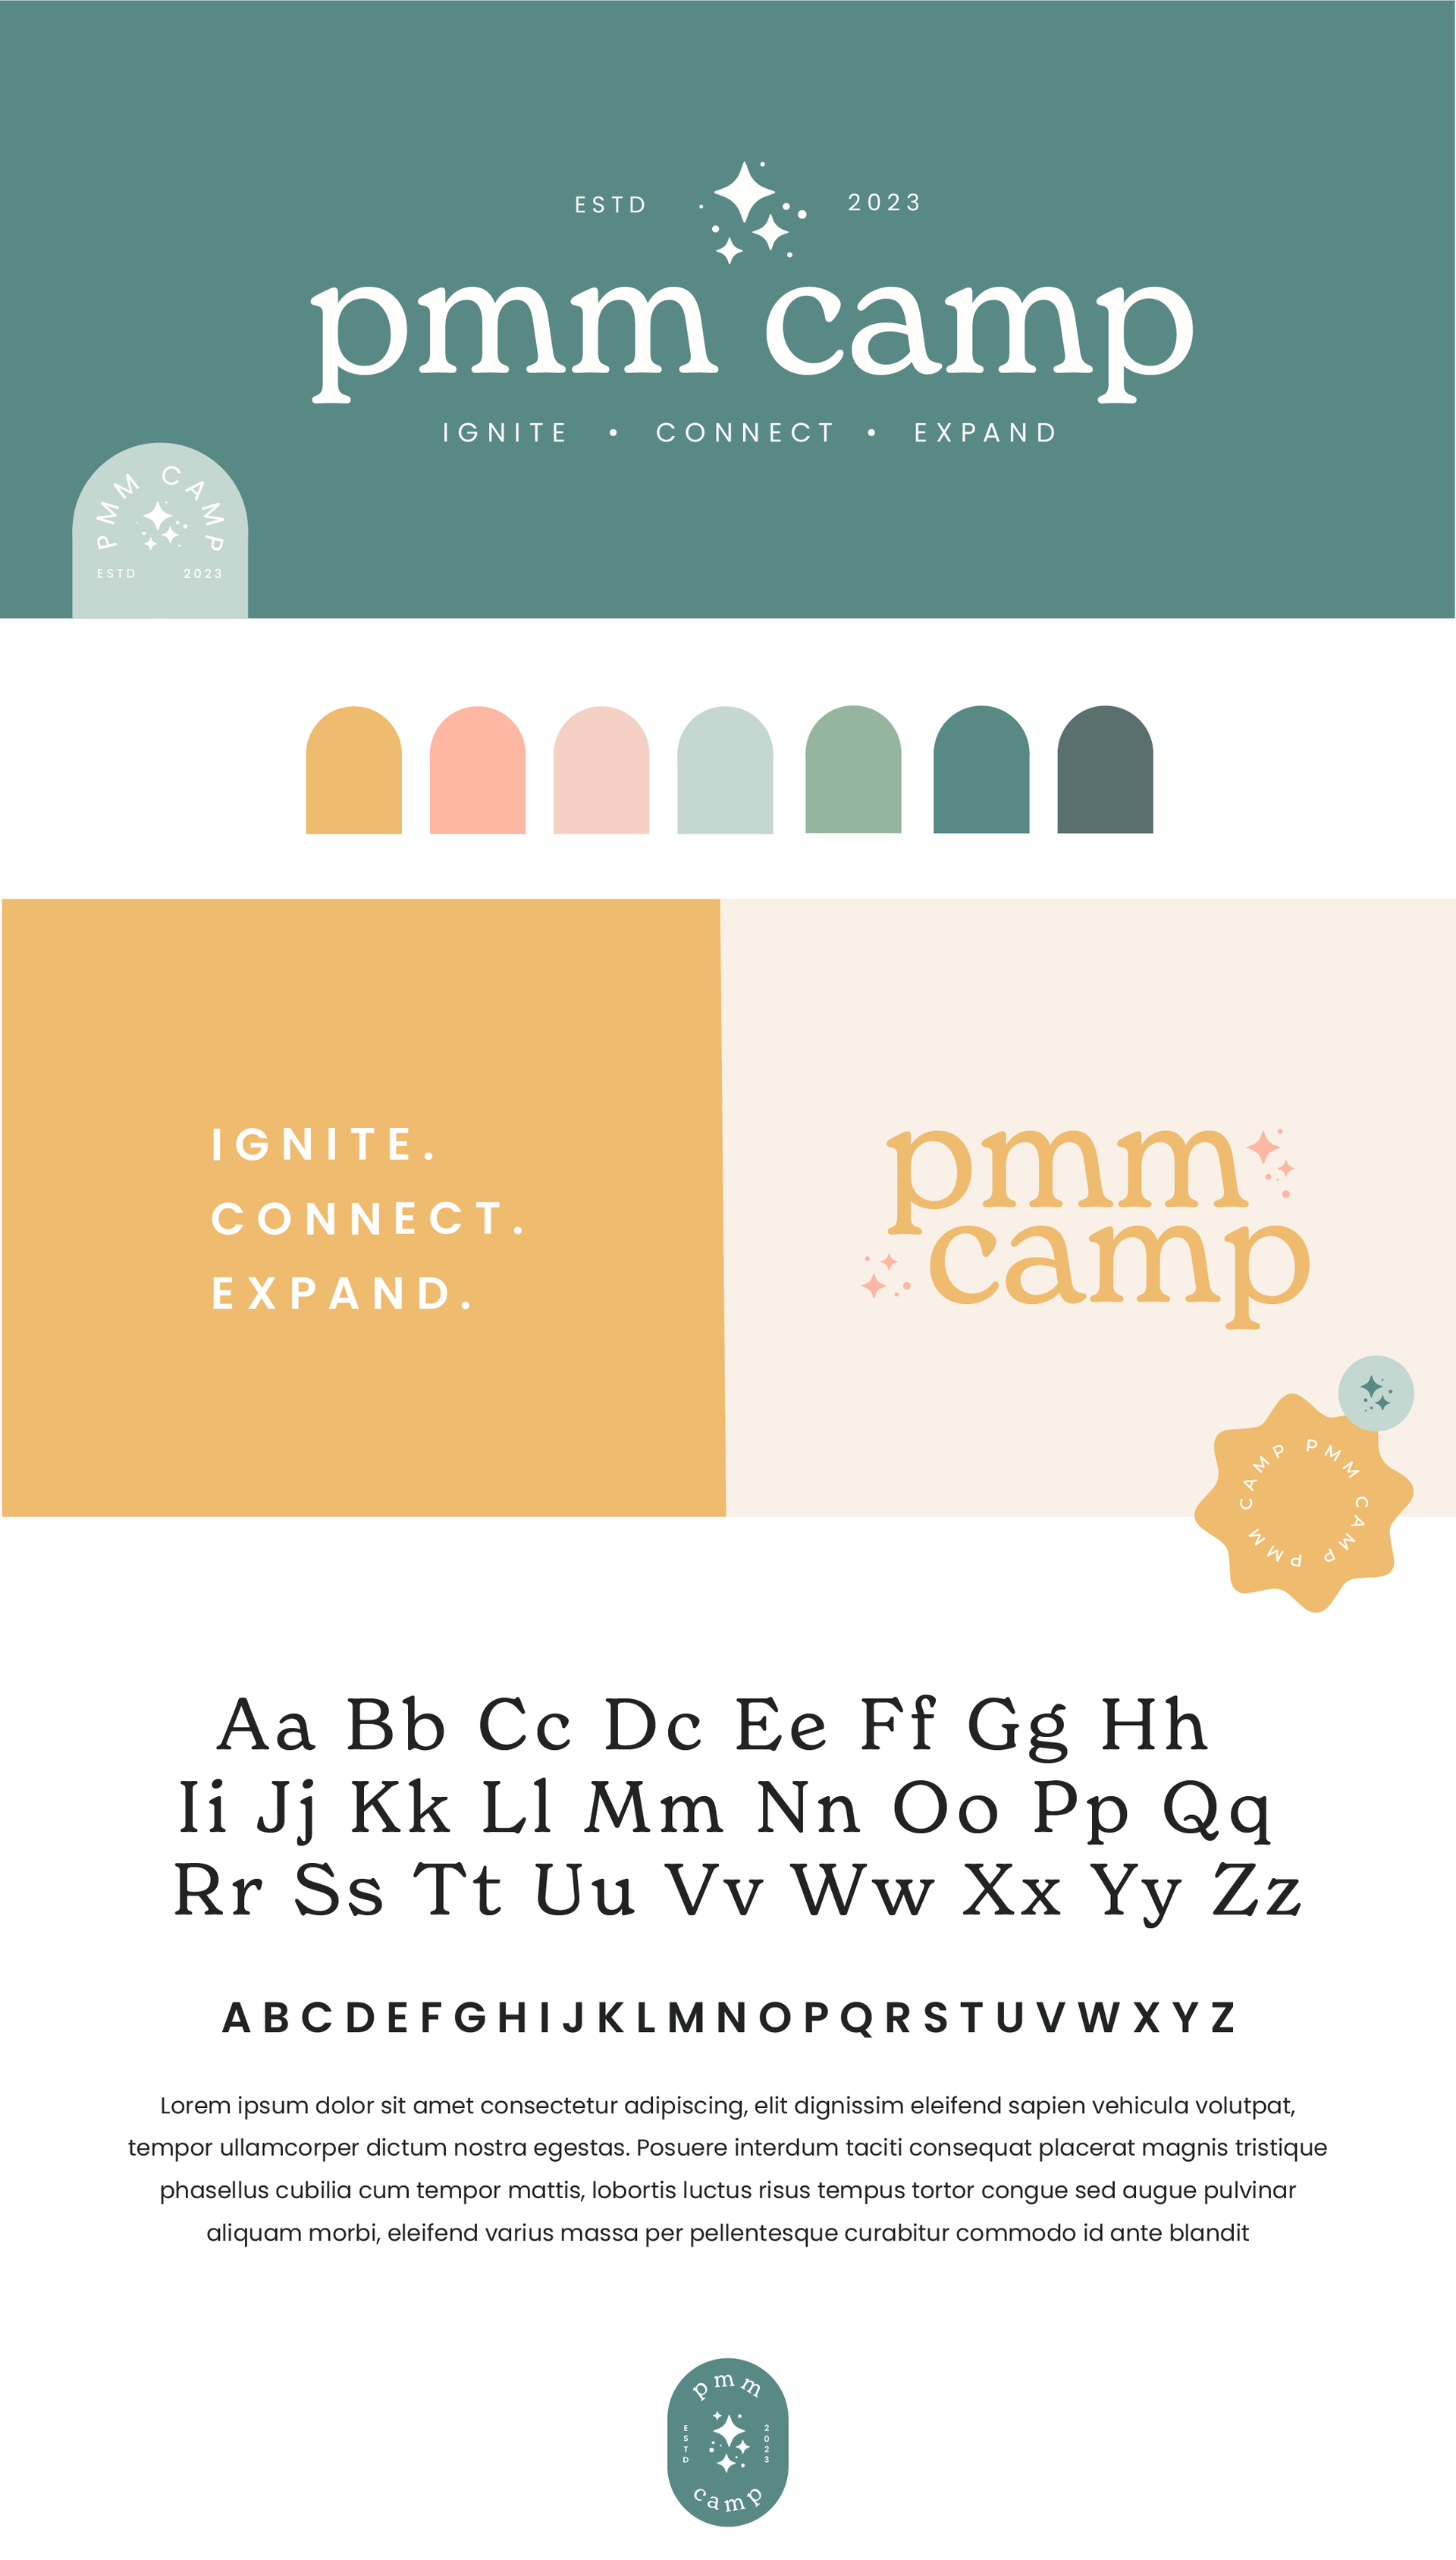 A graphic of a logo and alphabet for a company called pmm camp.